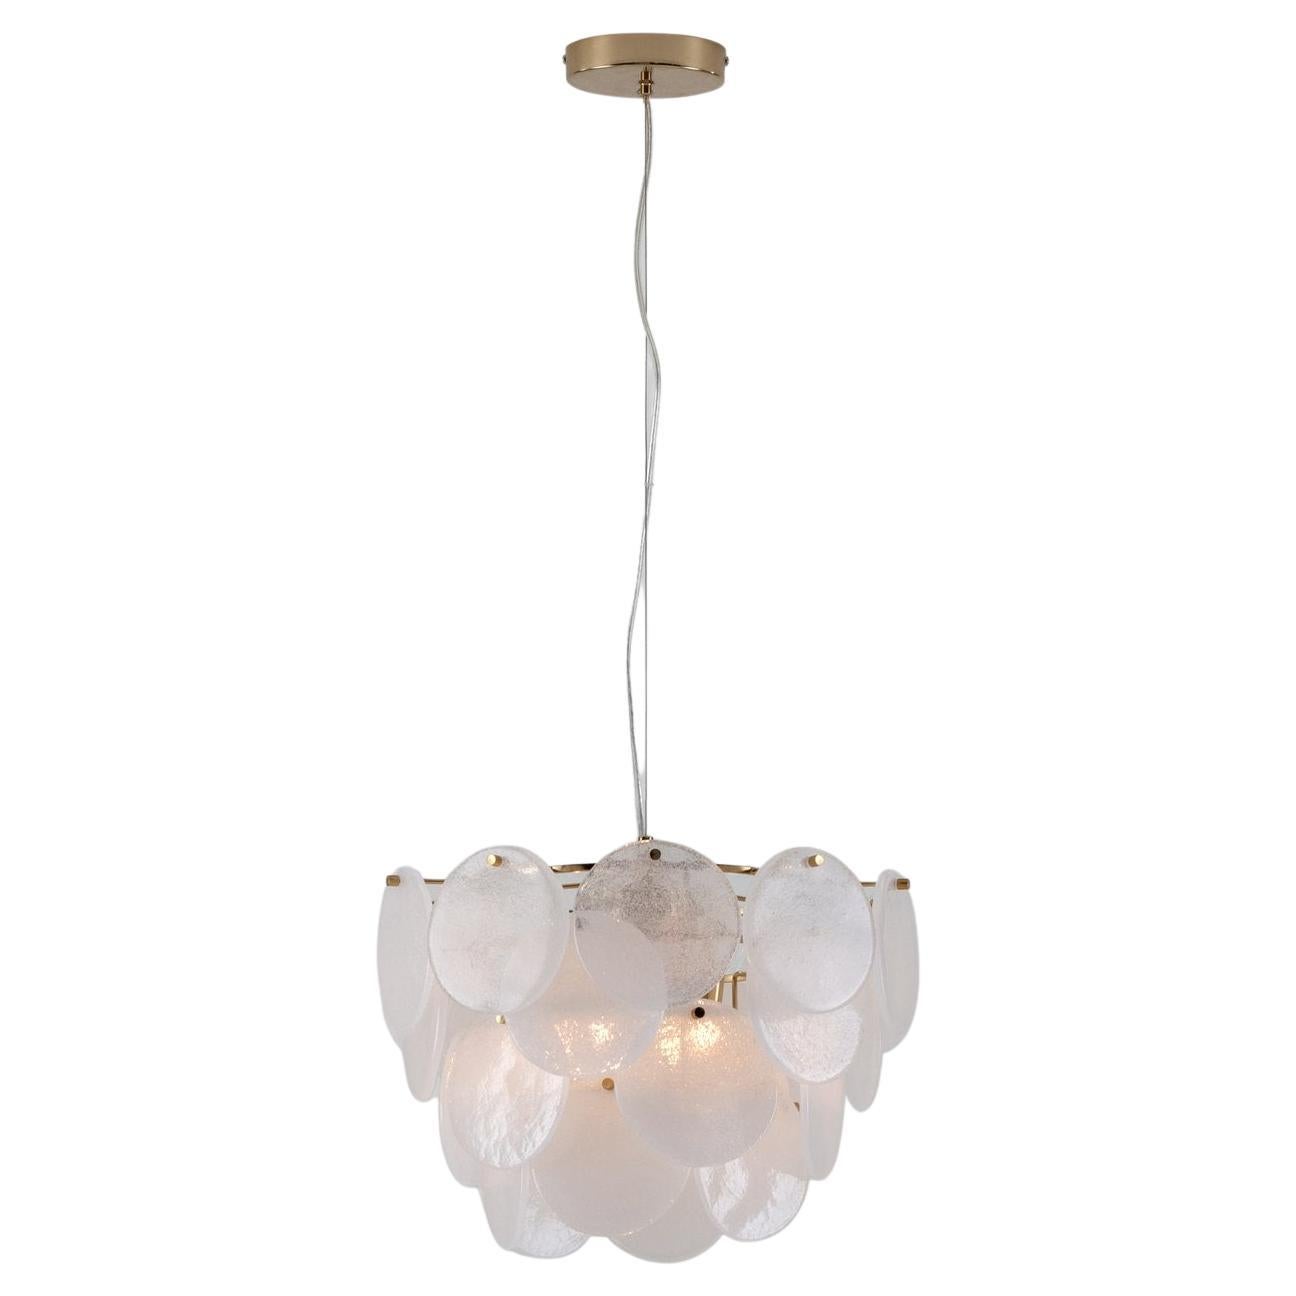 Houseof White Glass Disk Ceiling Light with Metal and Glass Shade